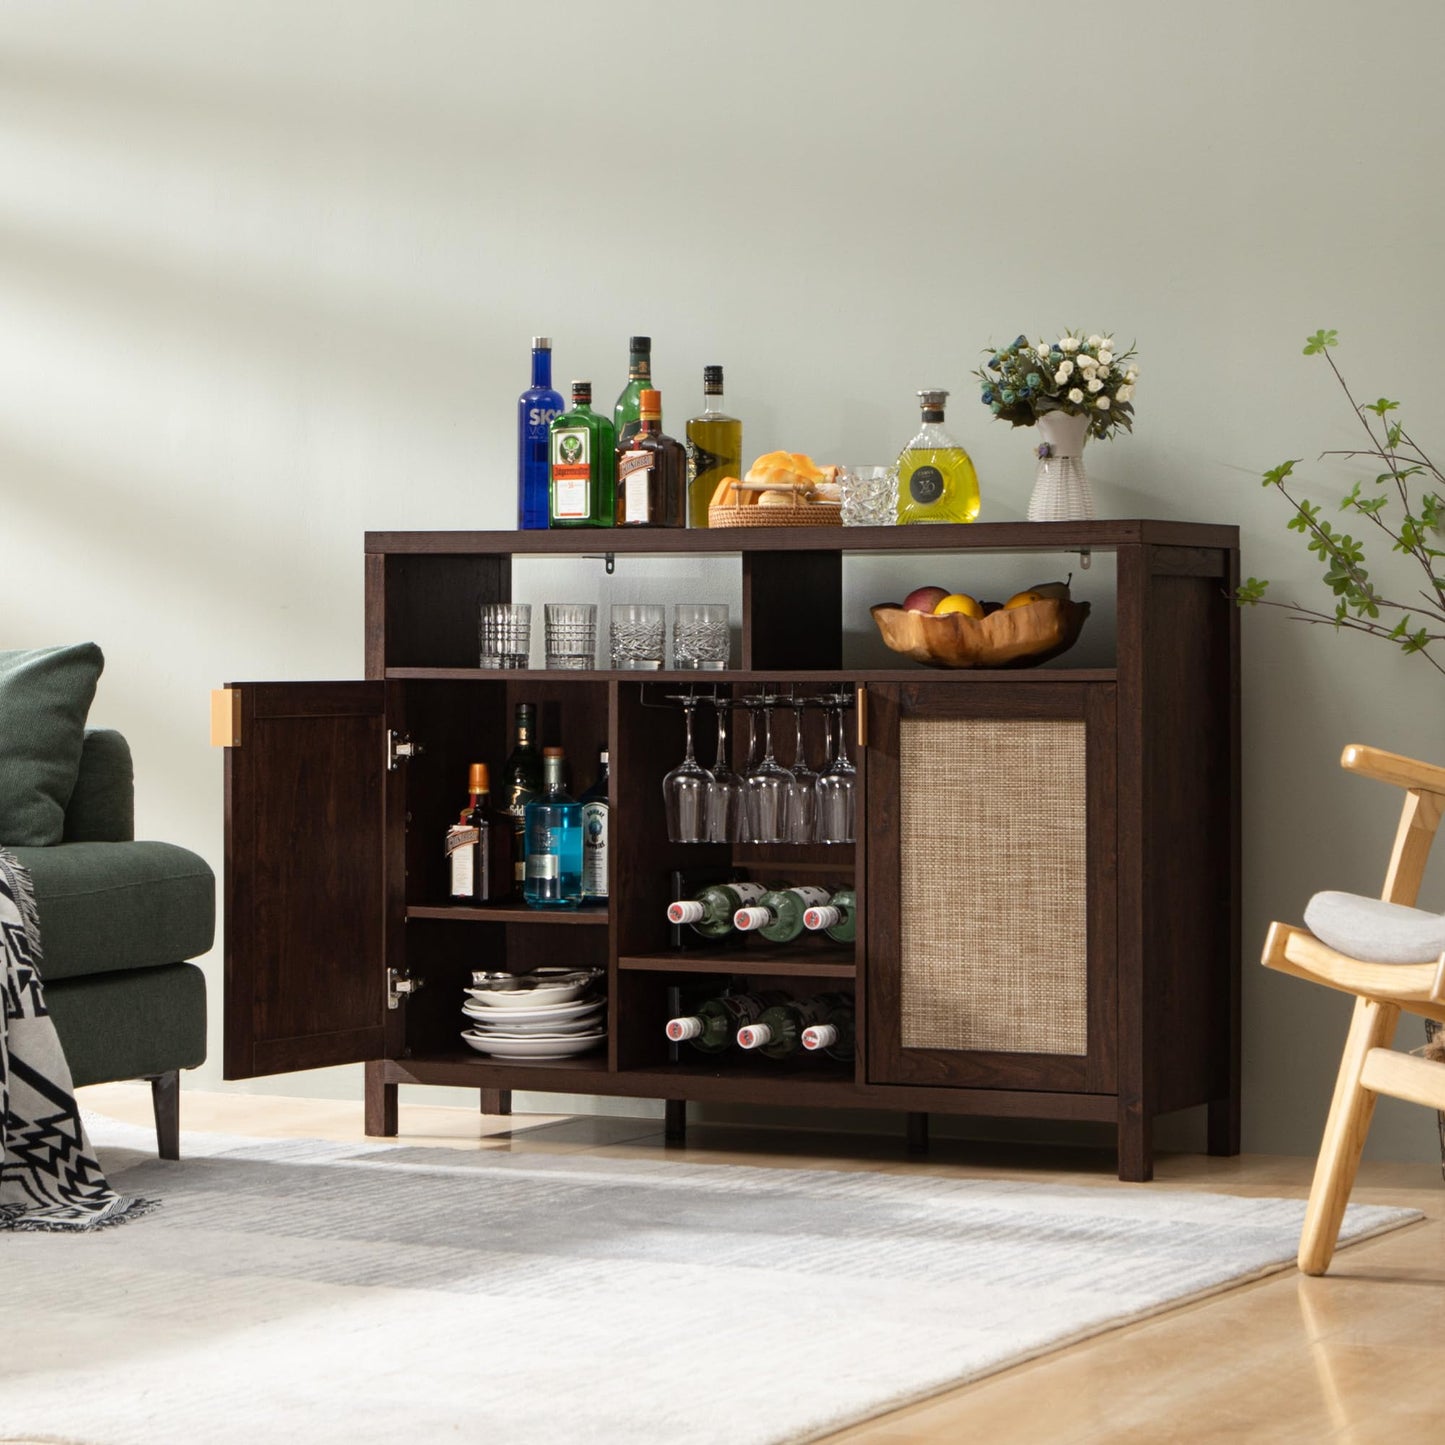 SICOTAS Rattan Coffee Bar Cabinet, 51" Sideboard Buffet Cabinet with Storage, Farmhouse Liquor Cabinet with Wine Racks Credenza Console Buffet Table